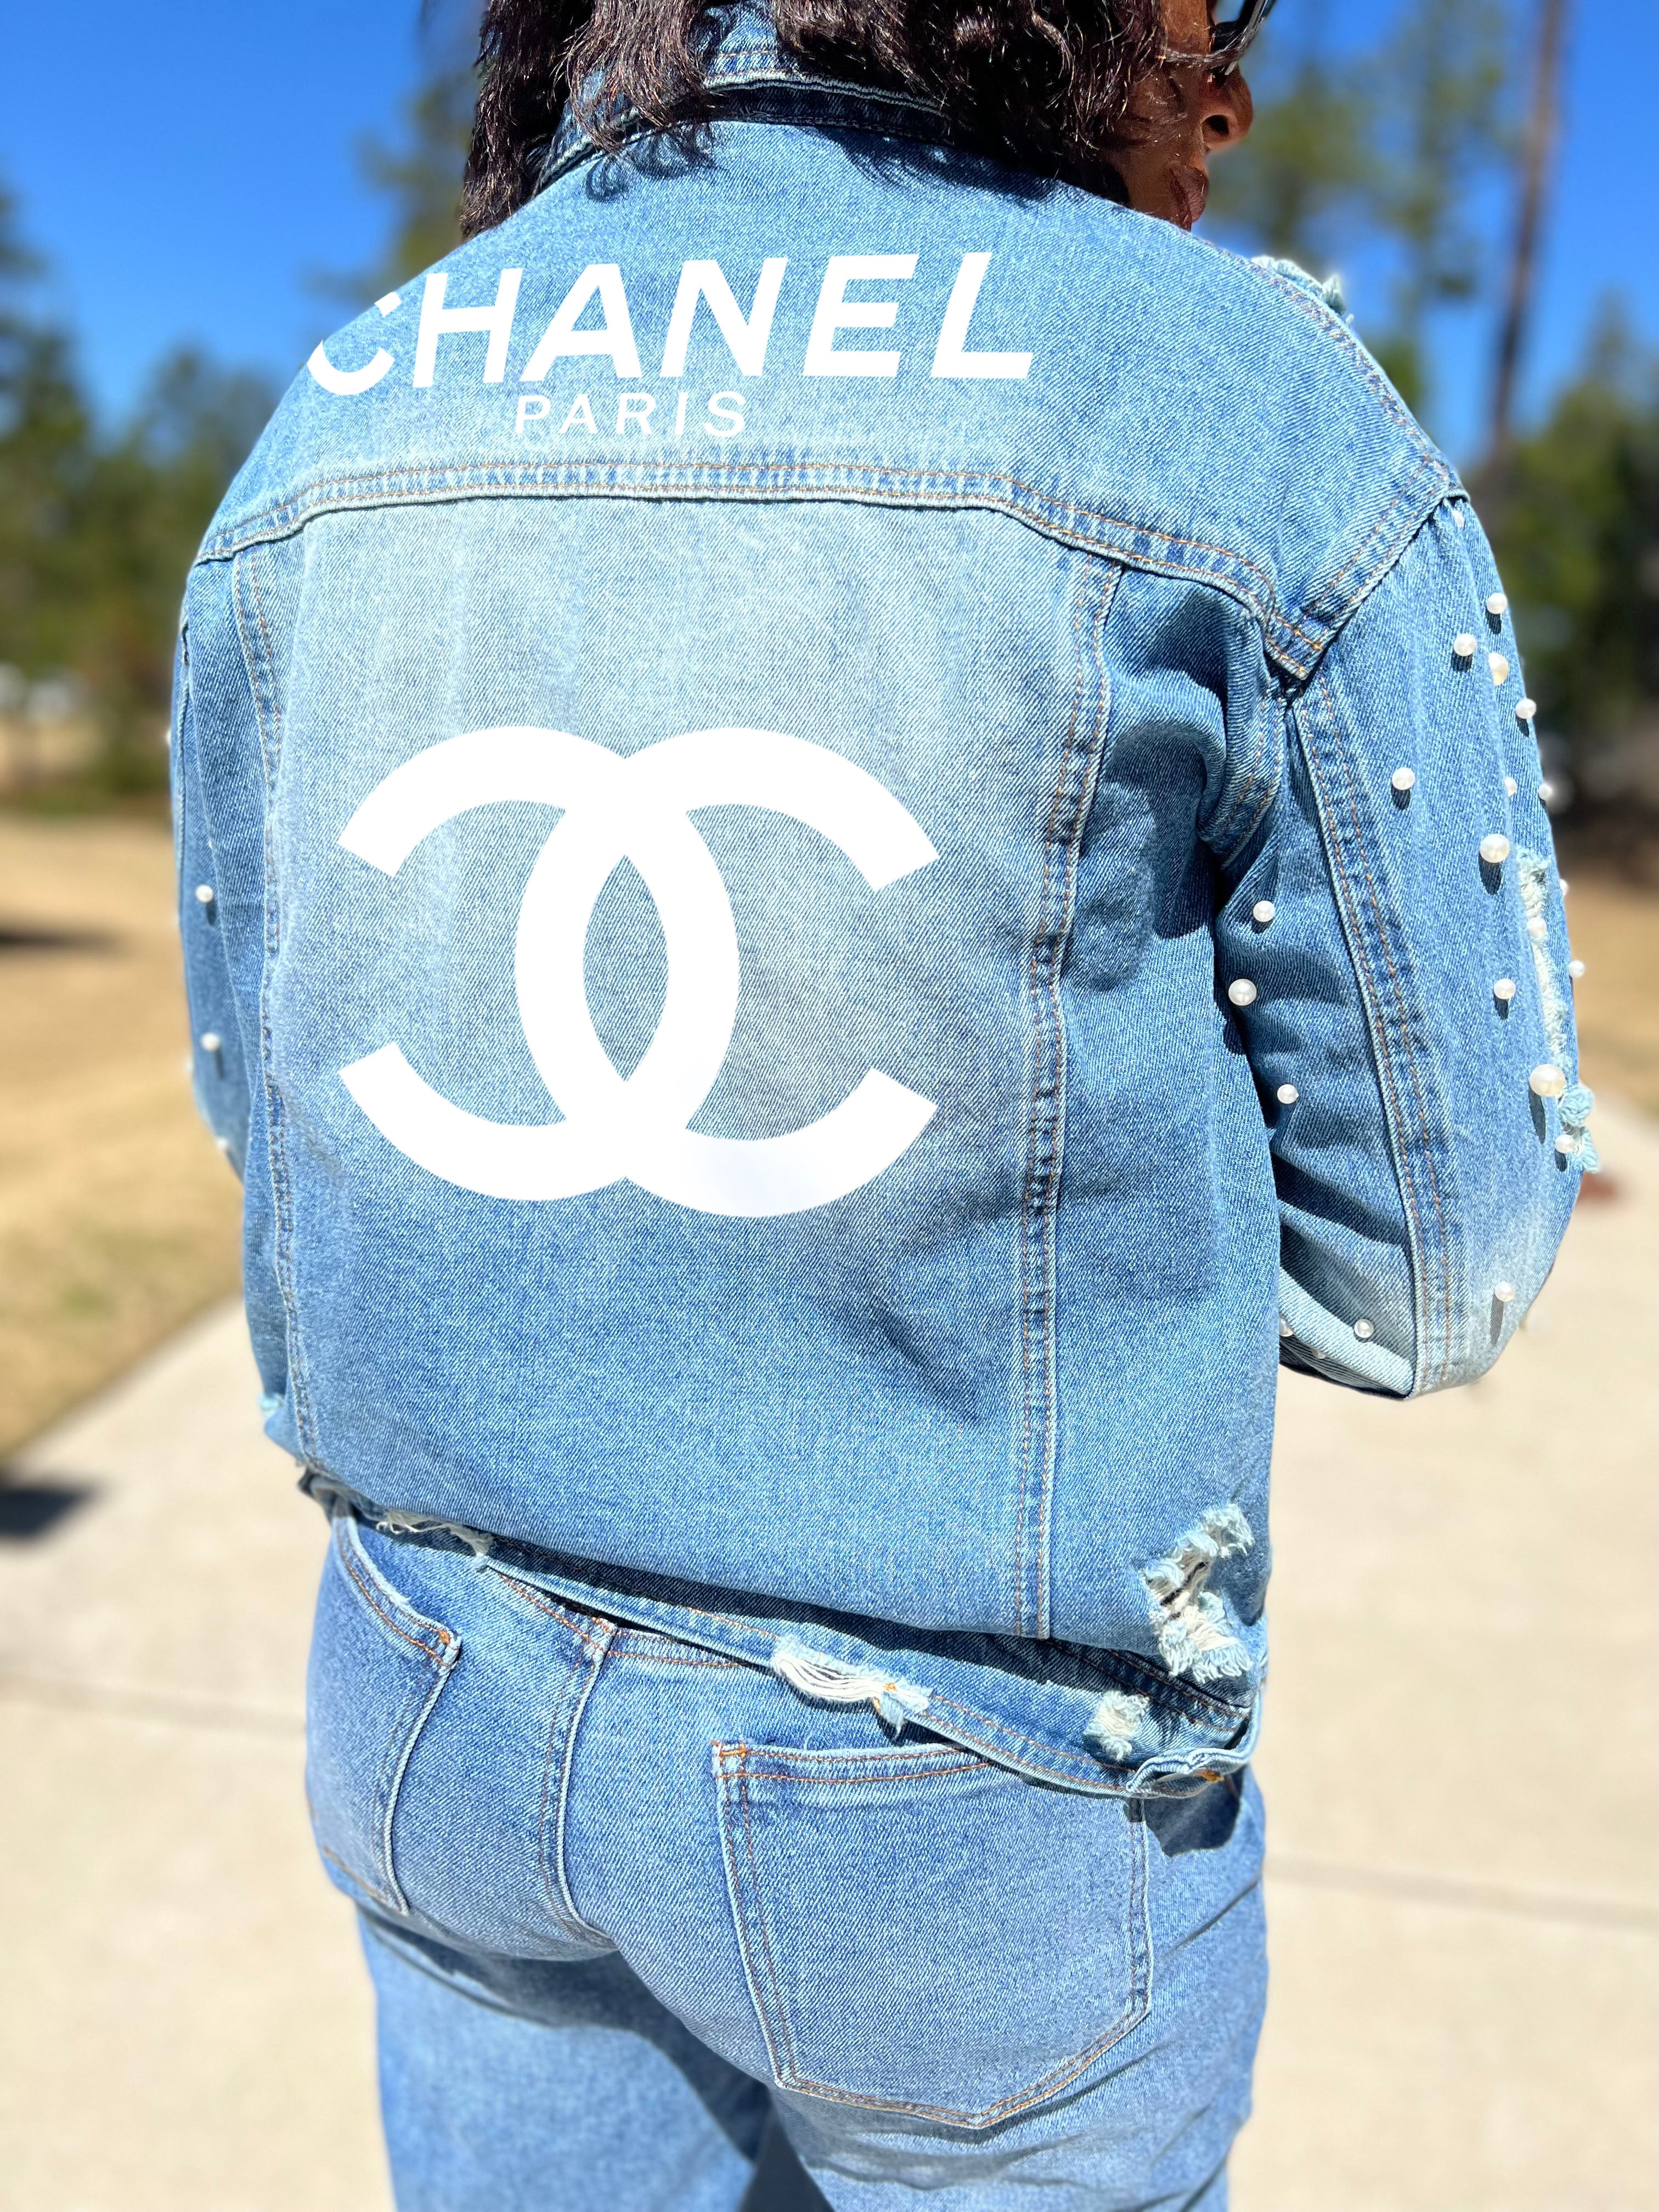 Custom Made CHANEL Jean jacket  Clothes design, Chanel inspired, Chanel  jeans